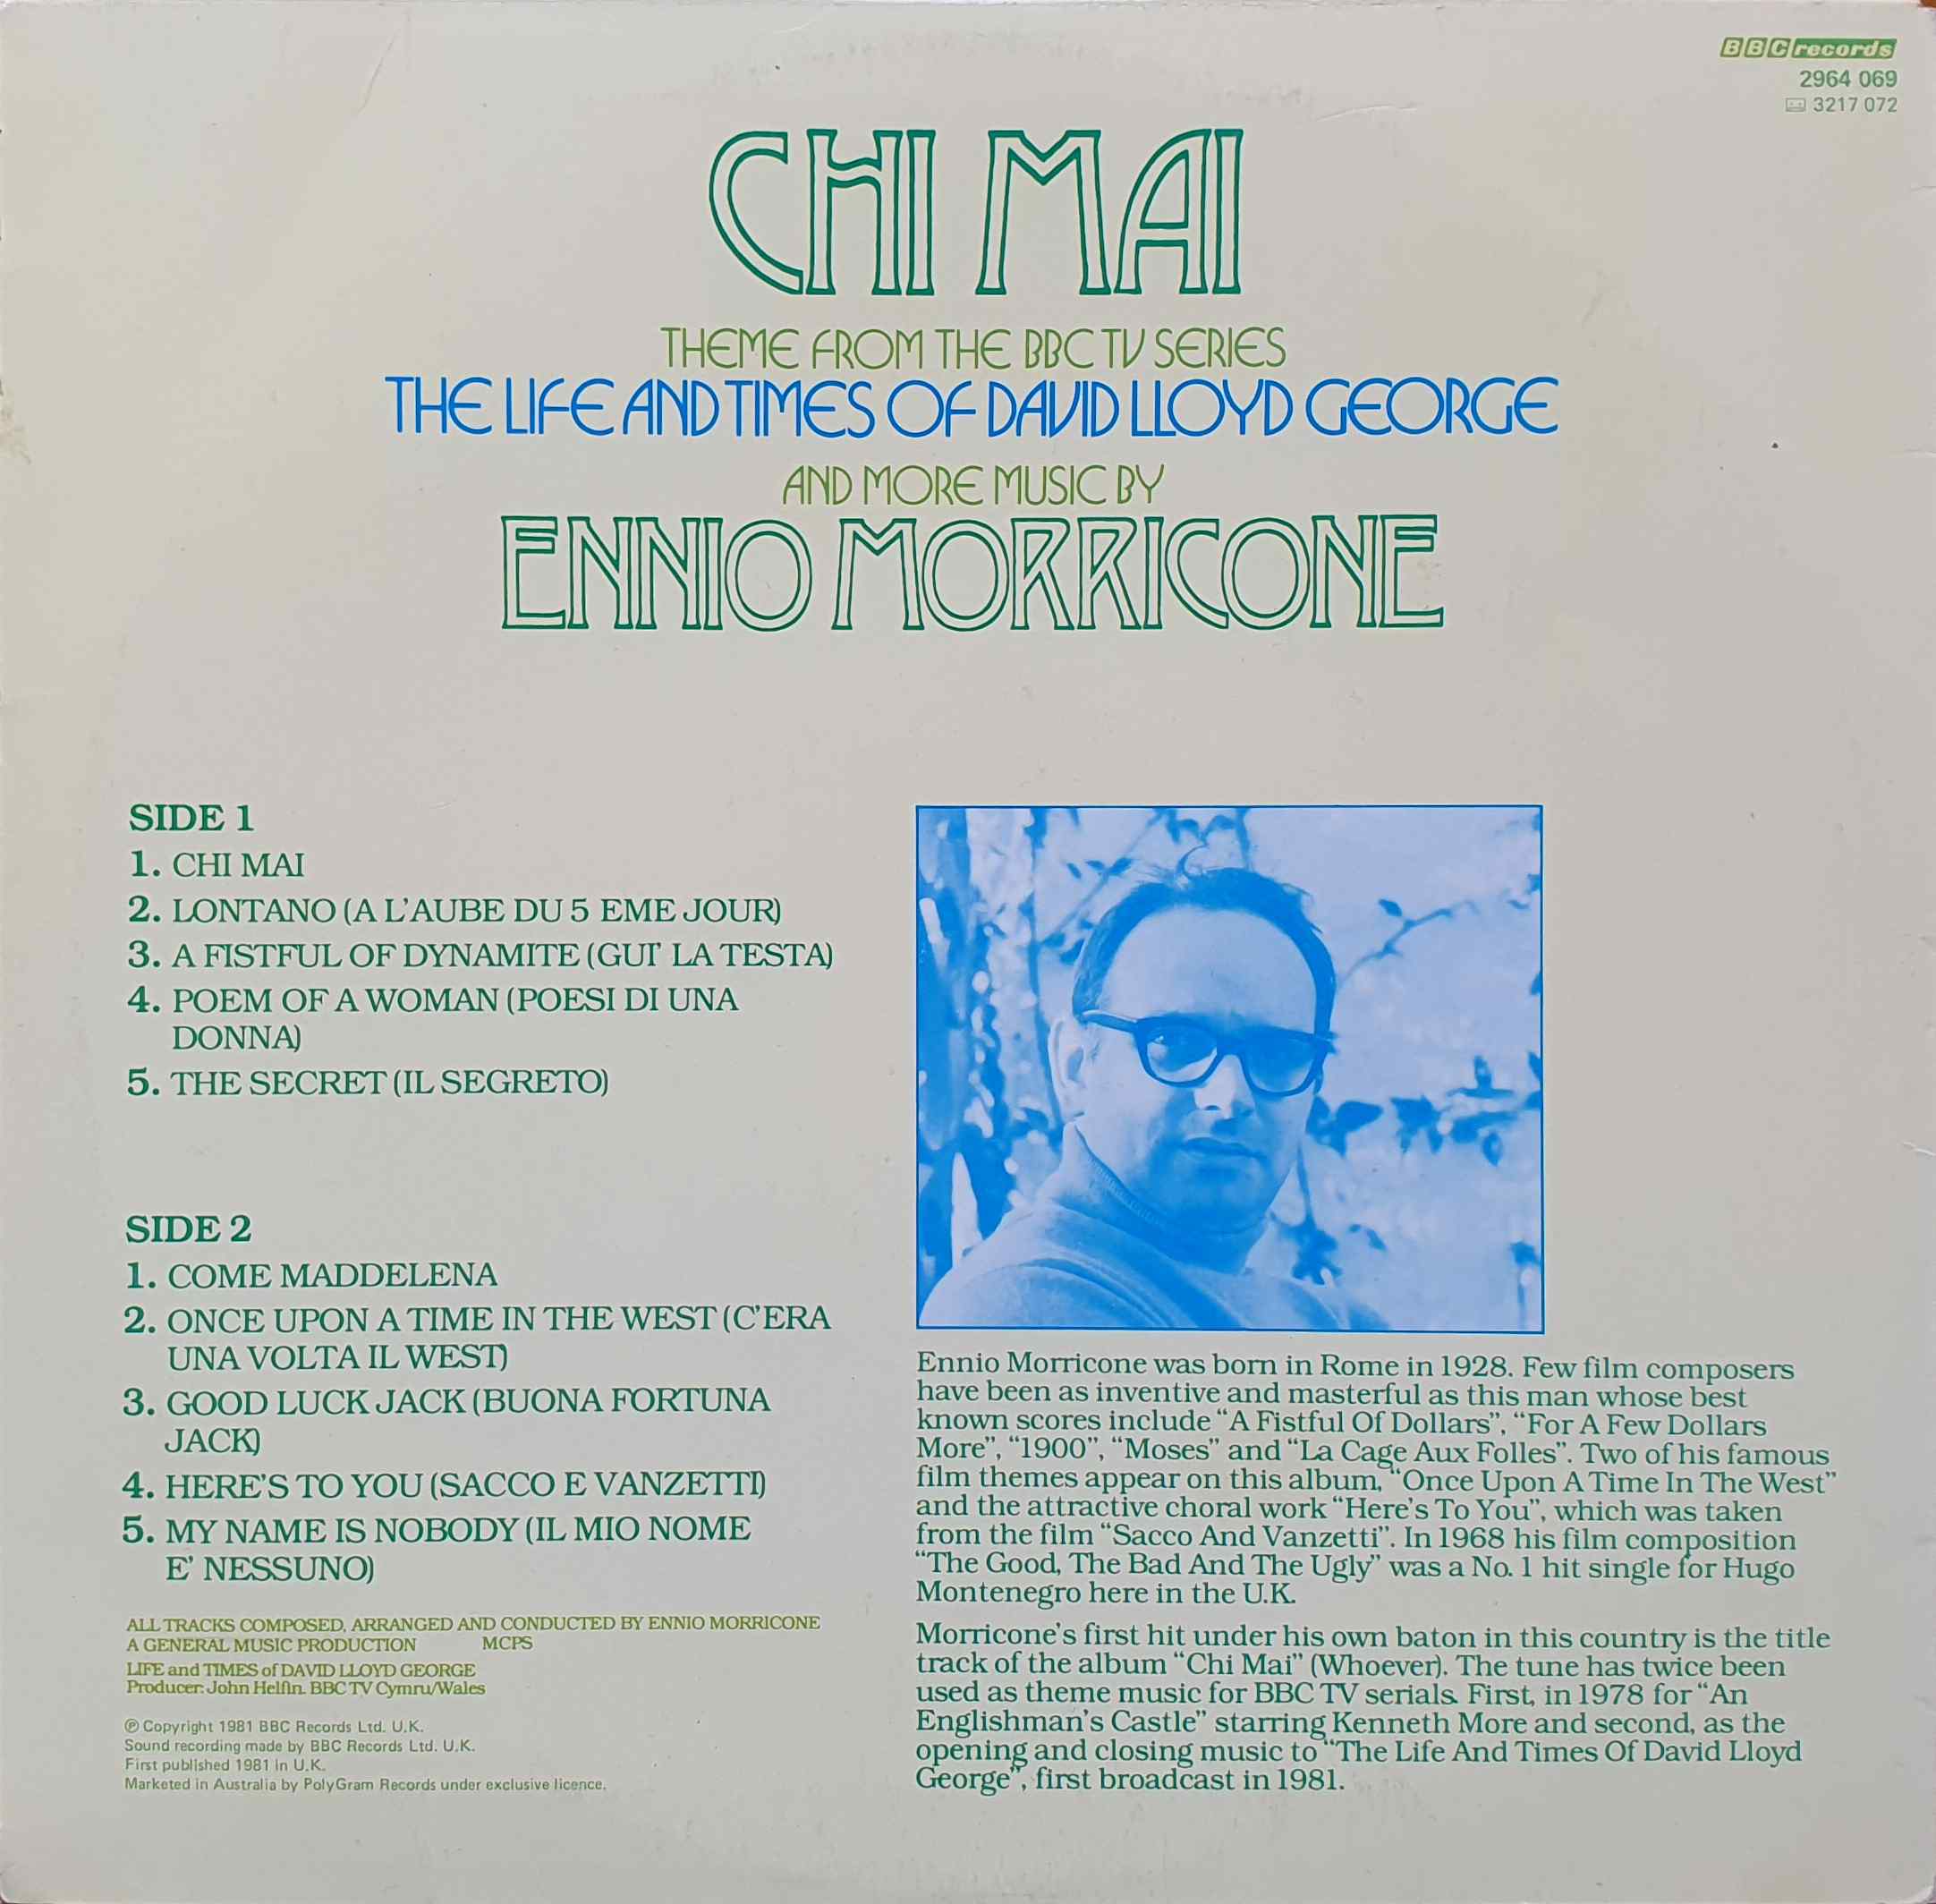 Picture of 2964 069 Chi Mai by artist Ennio Morricone from the BBC records and Tapes library